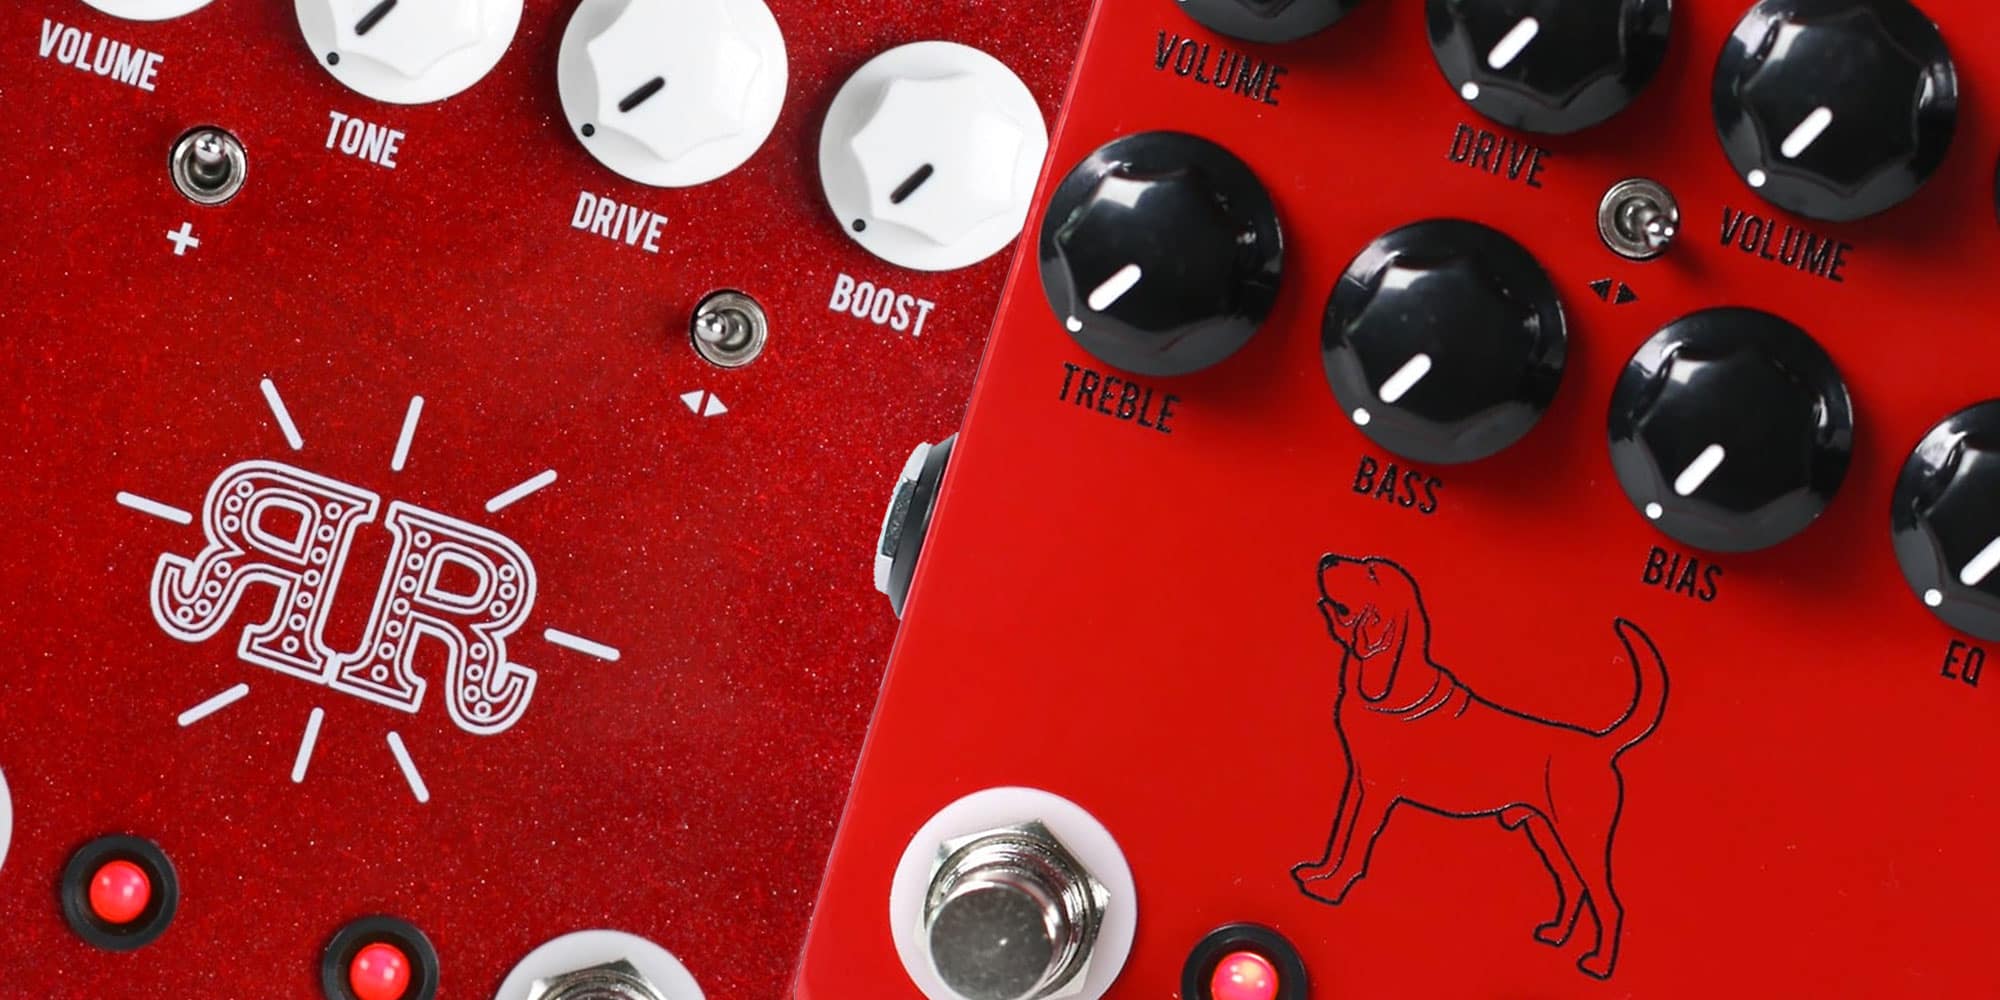 JHS Releases Ruby Red and Calhoun | Reverb News